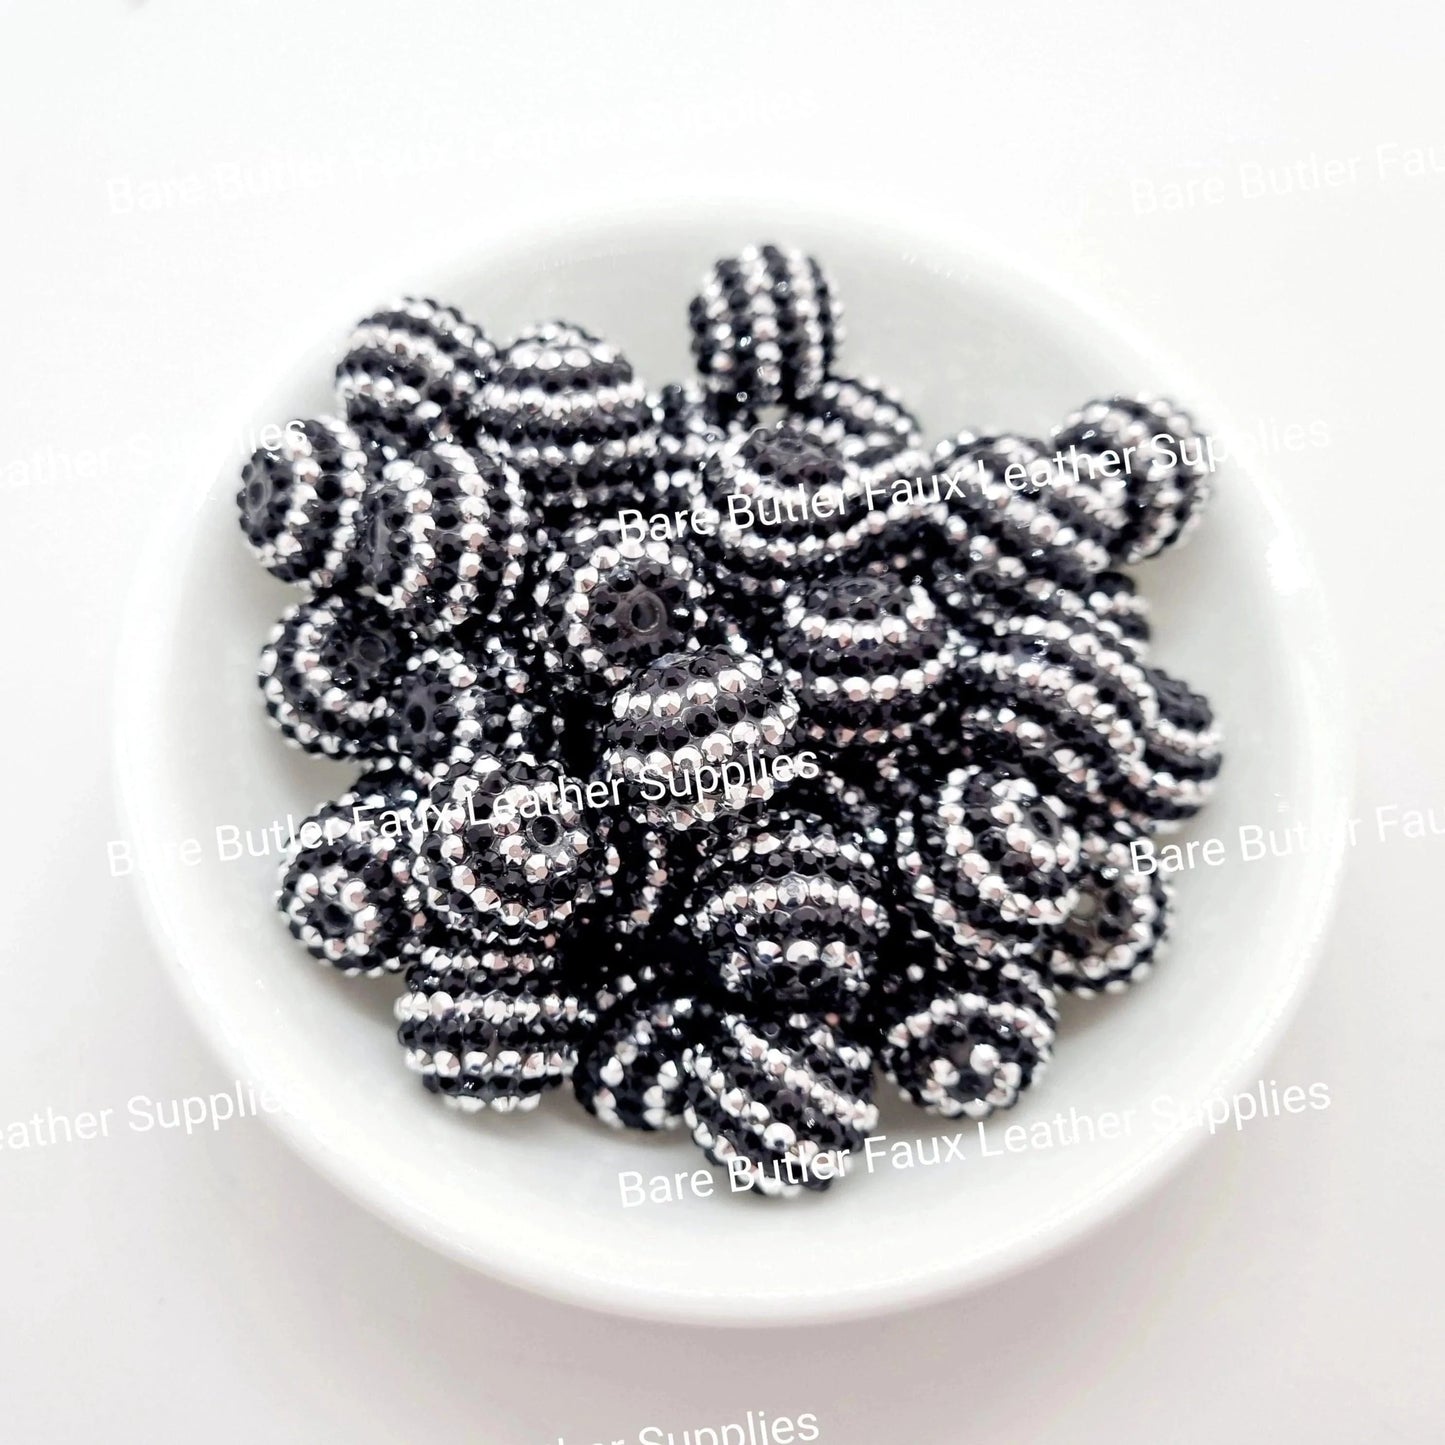 Black & Silver Sparkle Beads -  - Bare Butler Faux Leather Supplies 